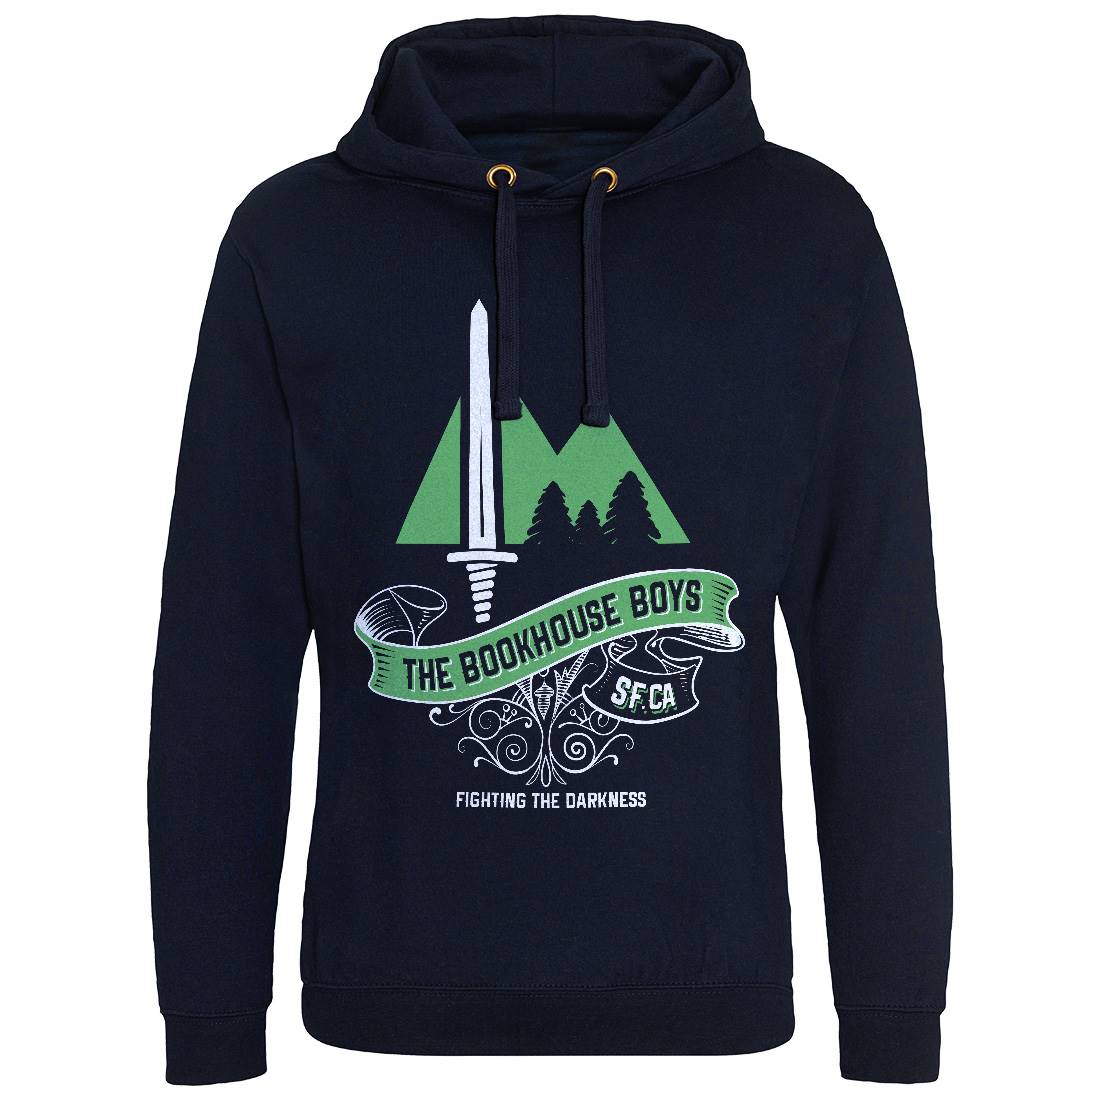 Bookhouse Boys Mens Hoodie Without Pocket Horror D319